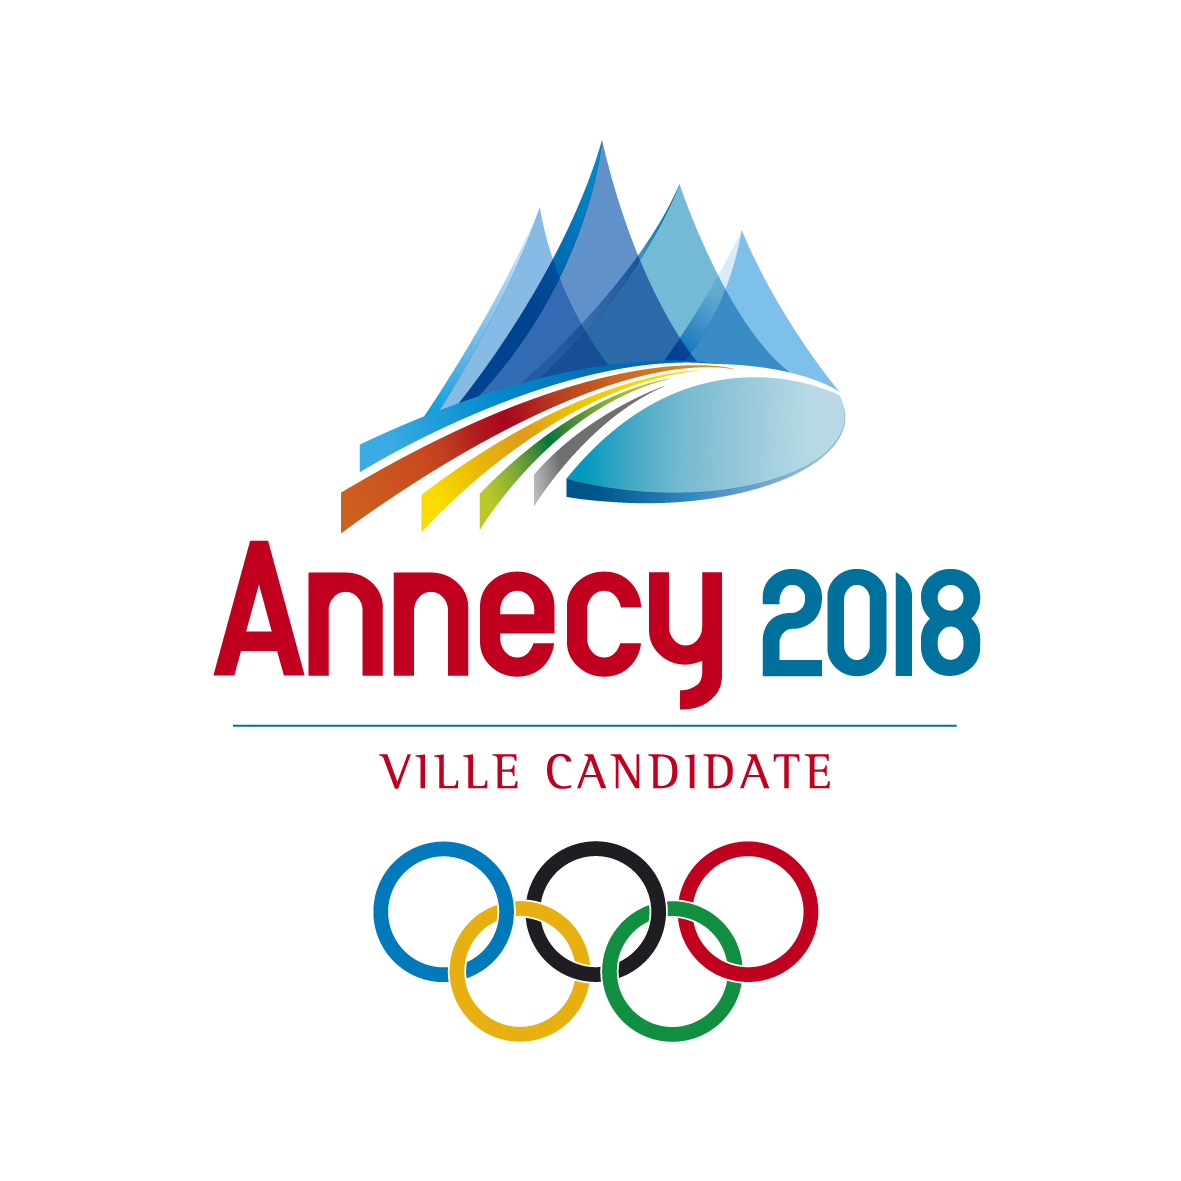 While Annecy 2018 had its flaws, it was a serious contender ©Annecy 2018